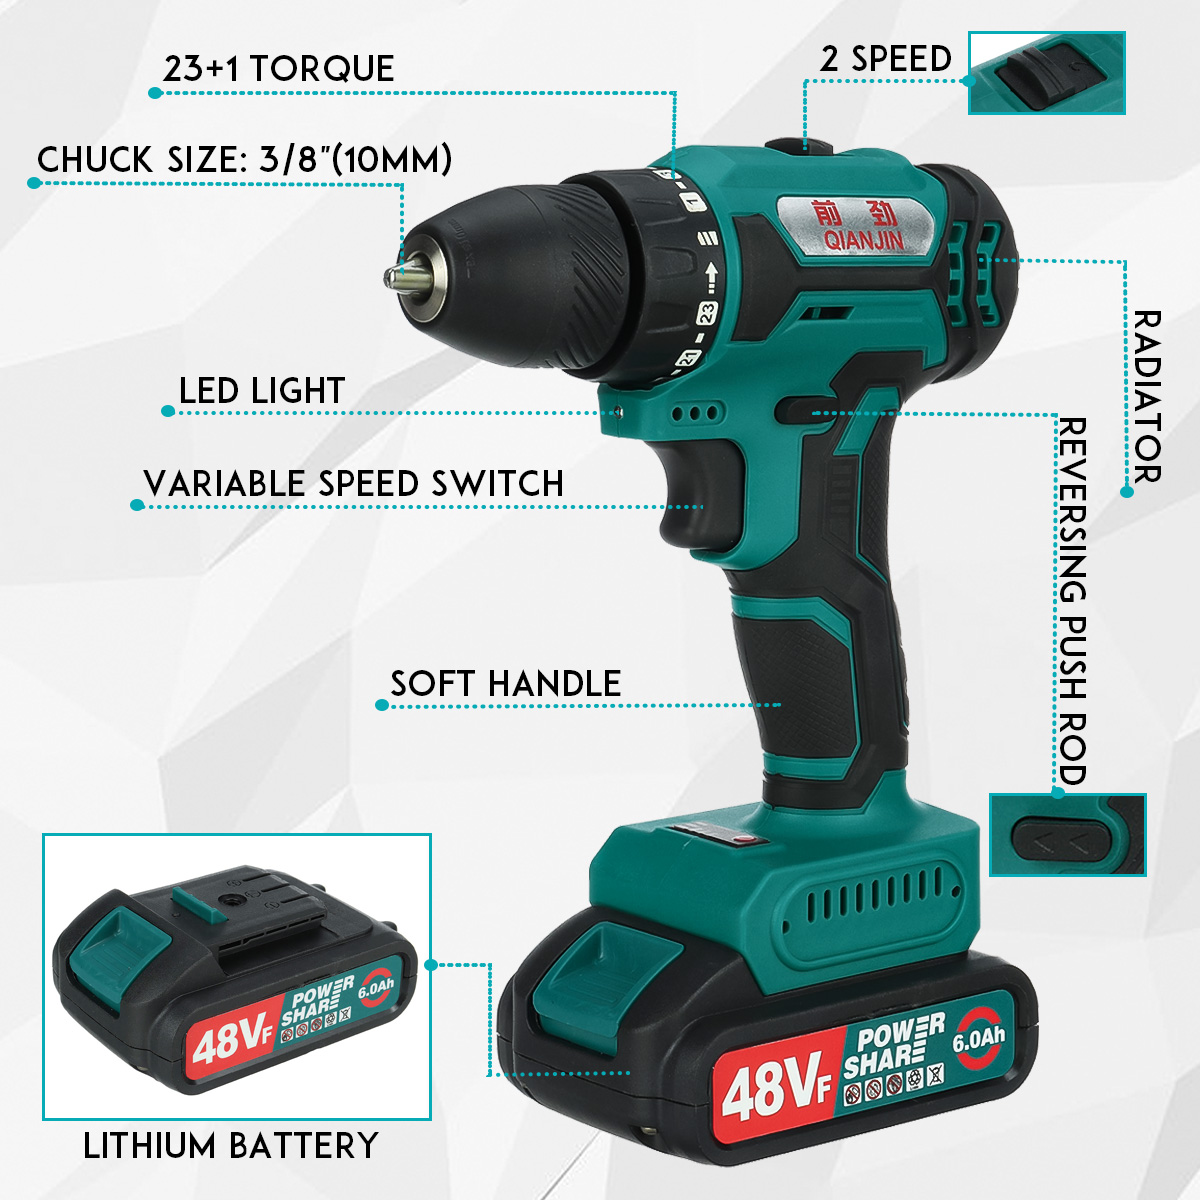 48VF-Brushless-High-Power-Torque-Drill-2-Speed-Rechargable-Electric-Screwdriver-Drill-With-None12-Pc-1840212-3